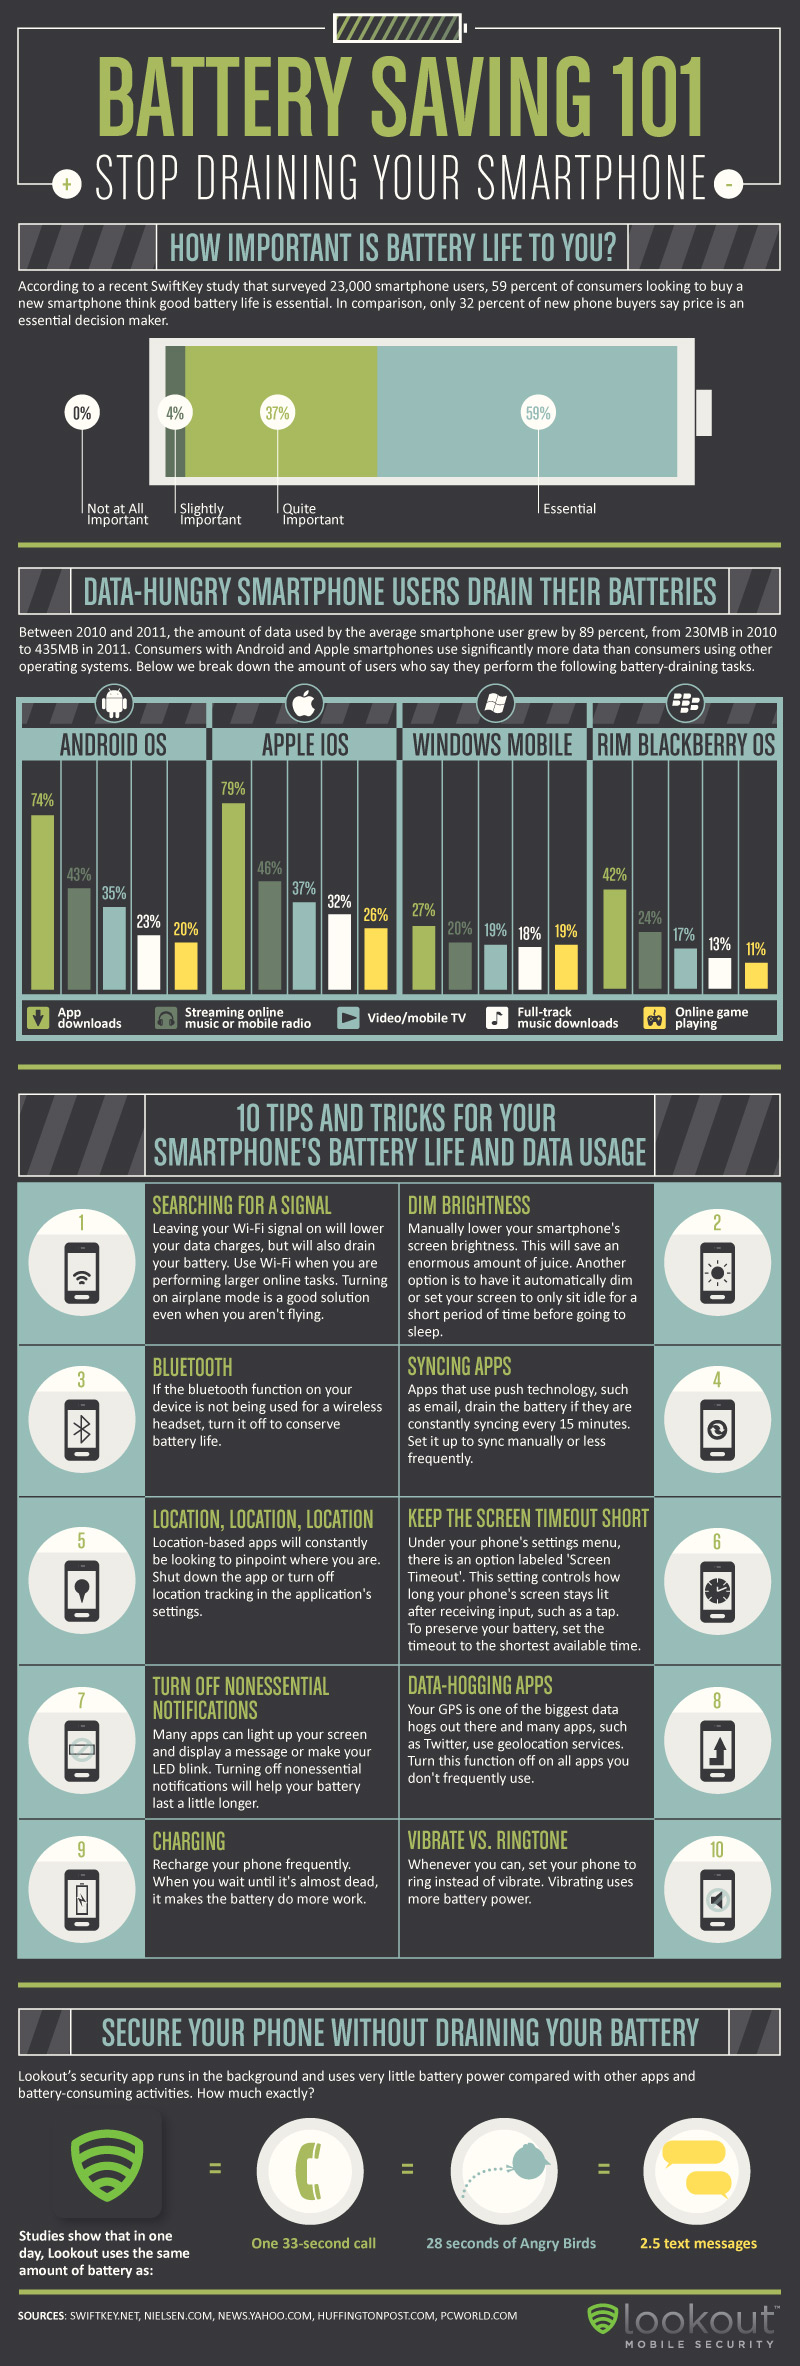 Guide to Saving Smartphone Battery Life